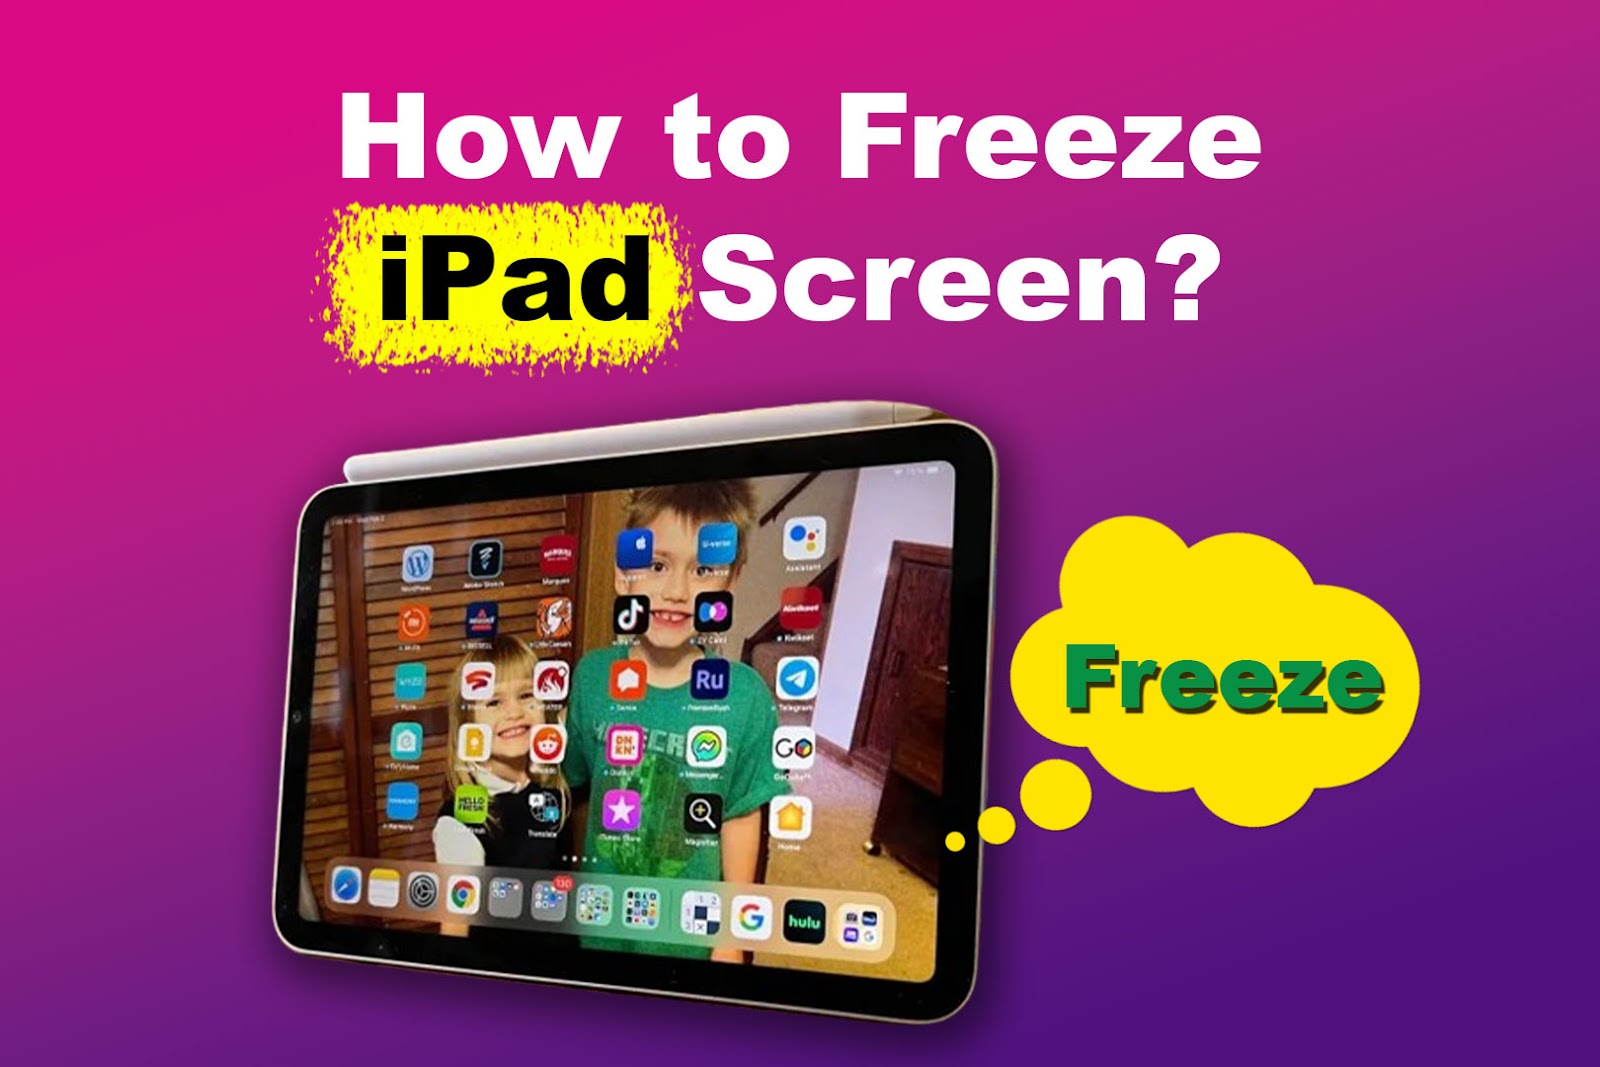 How to Freeze Your iPad Screen [✓ 5 Easy Steps]